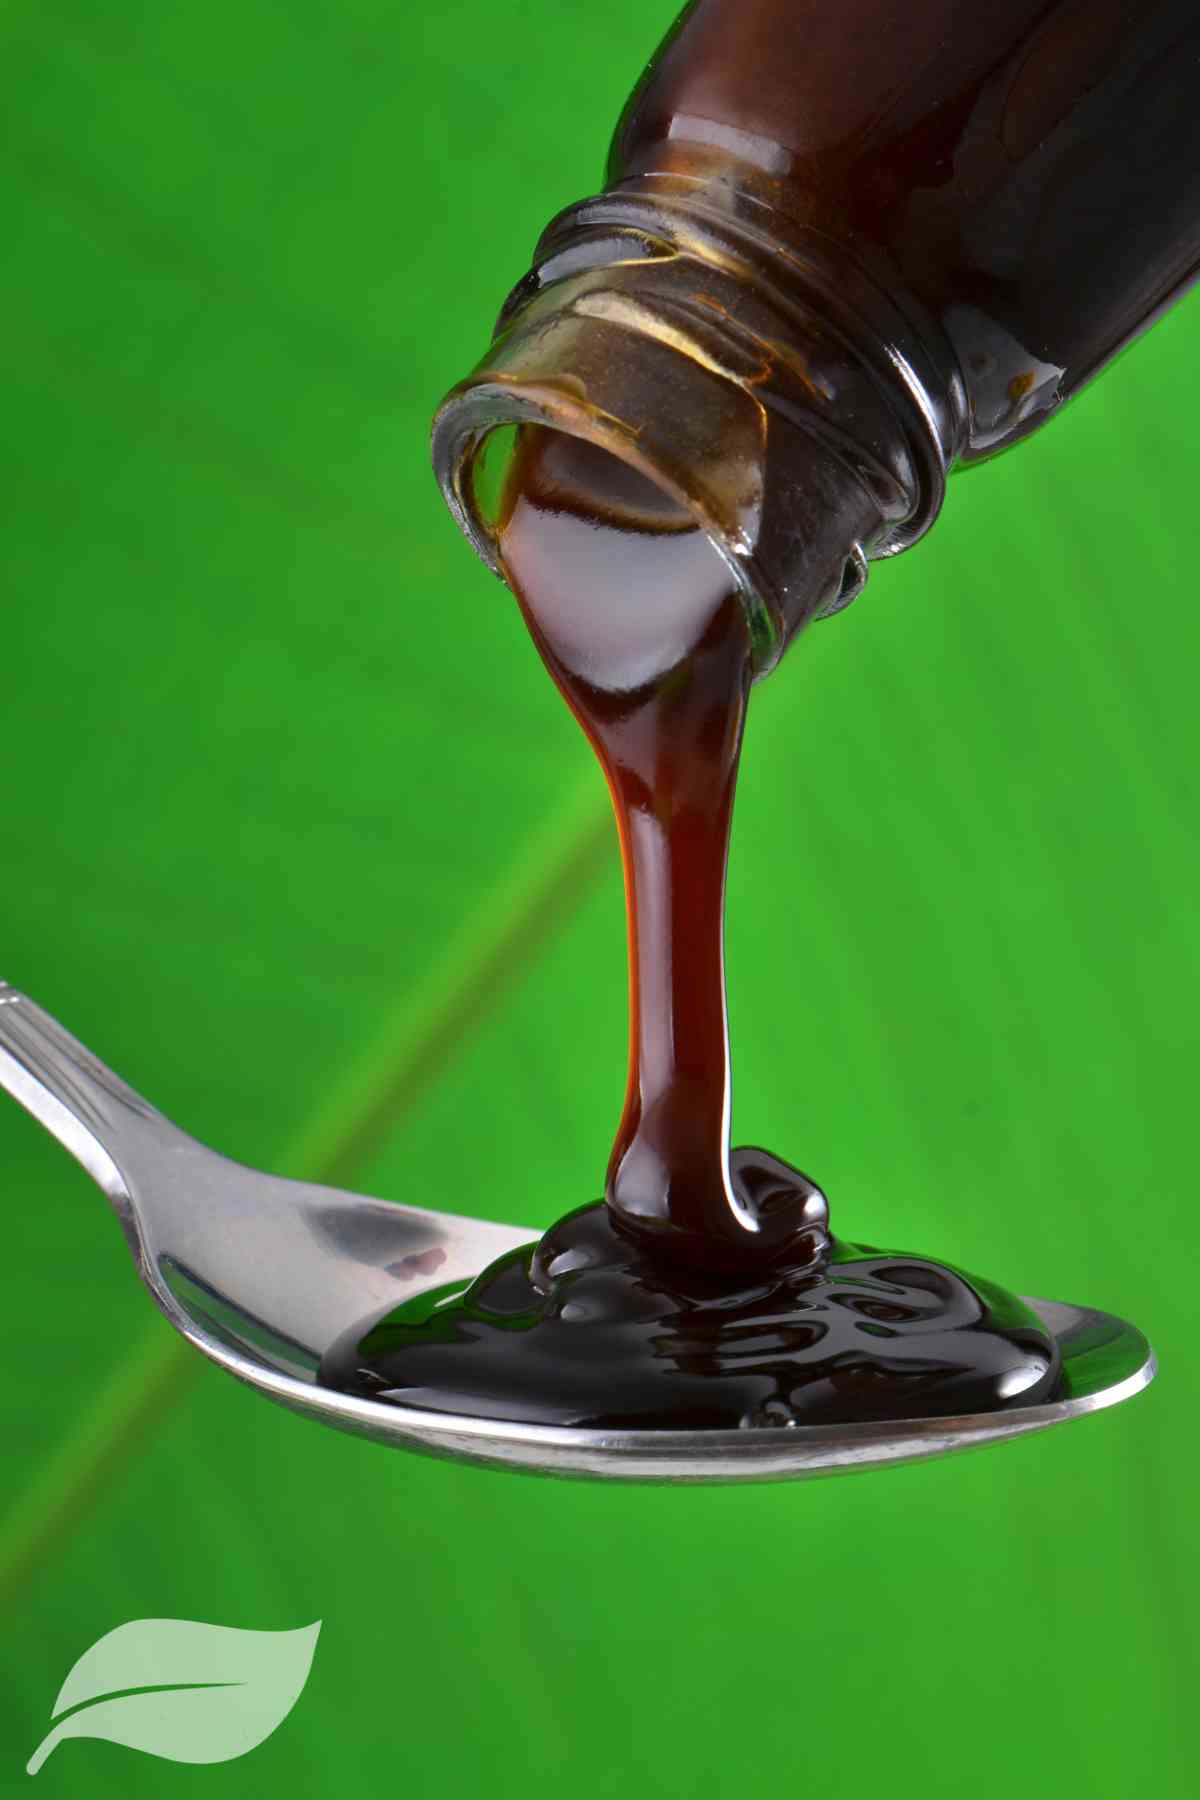 Asian oyster sauce being poured onto a spoon